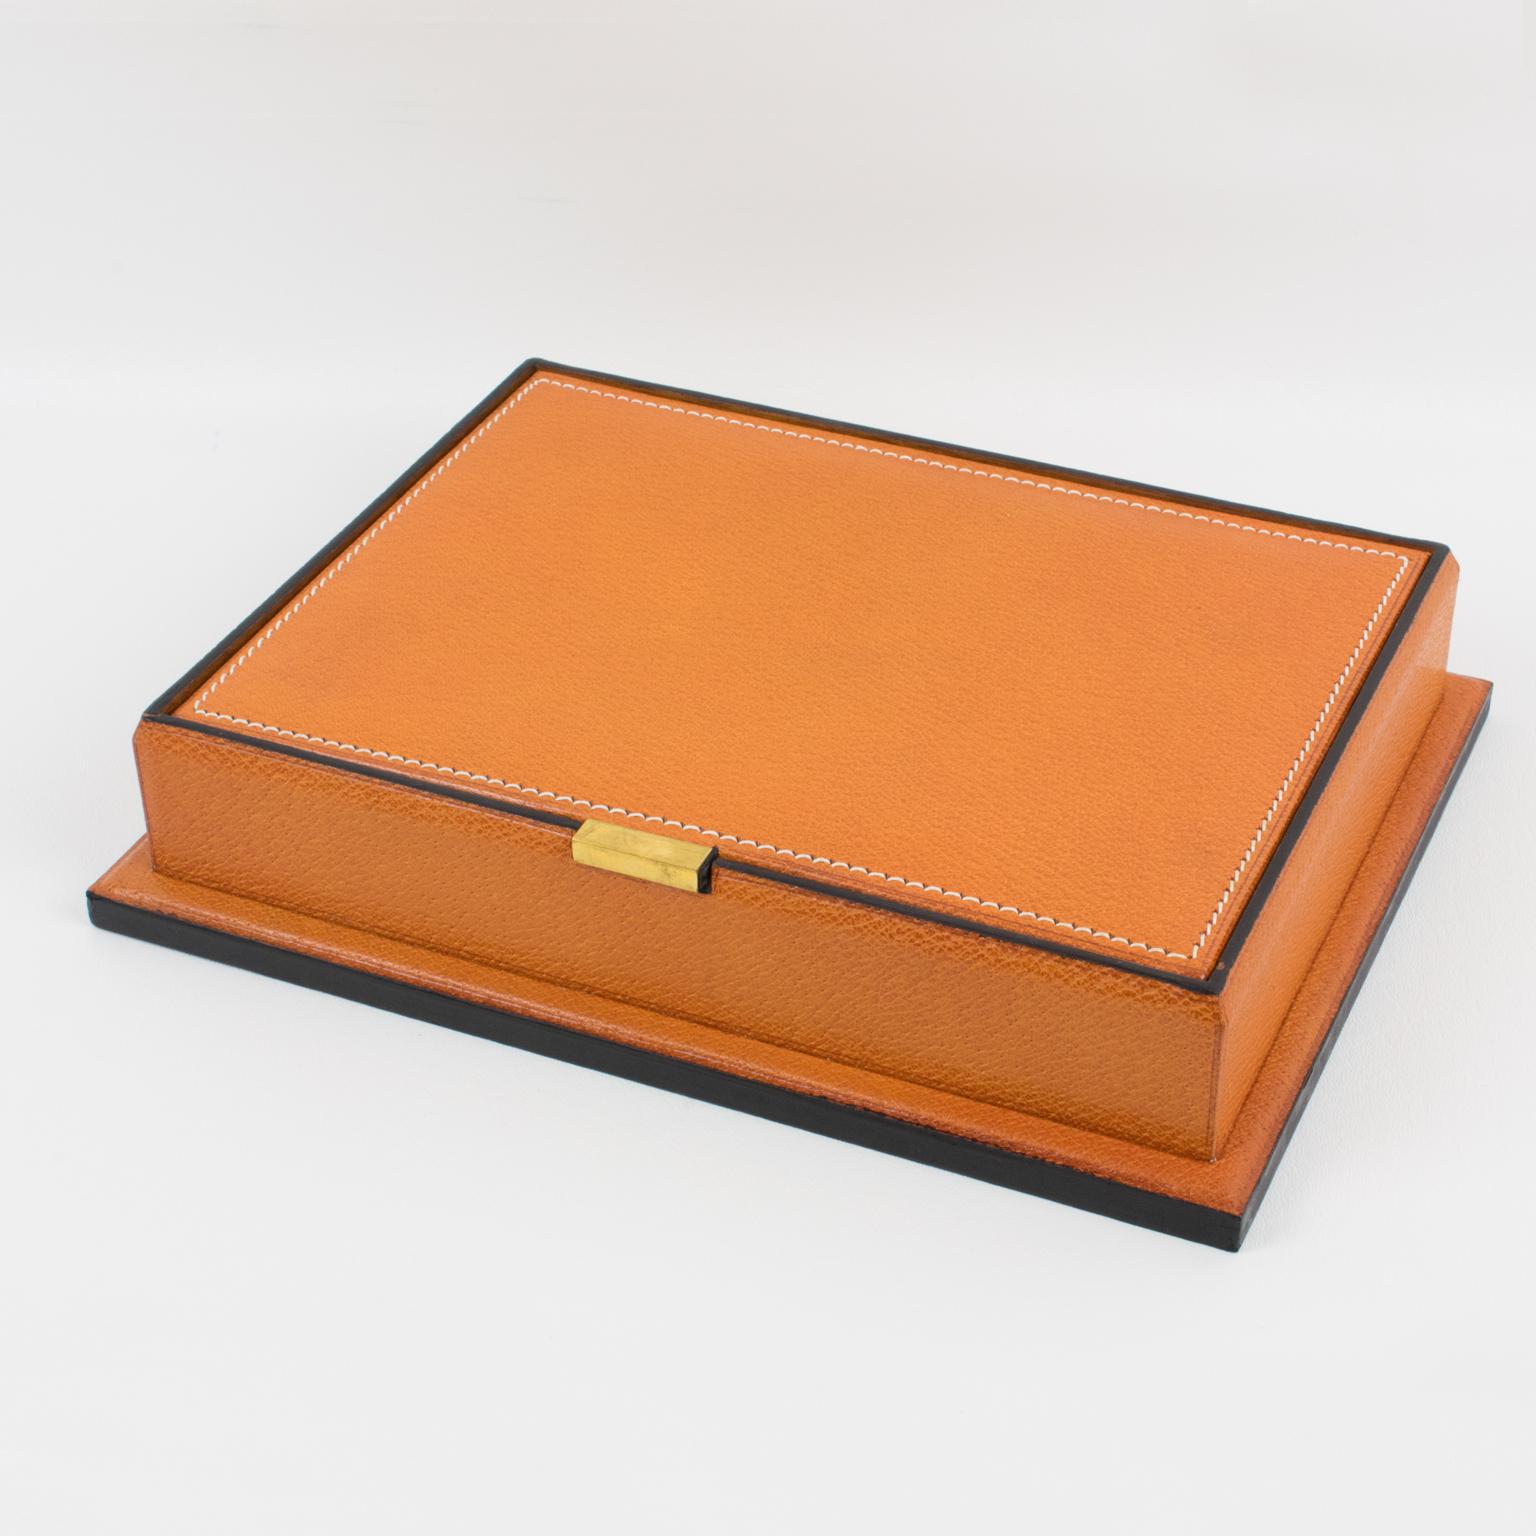 Beautiful 1940s modernist leather decorative box, desk accessory by Longchamp, Paris. Natural light cognac leather with pattern and hand-stitched finish. Tiny brass handle and varnish wood interior with compartments. In pristine condition, still